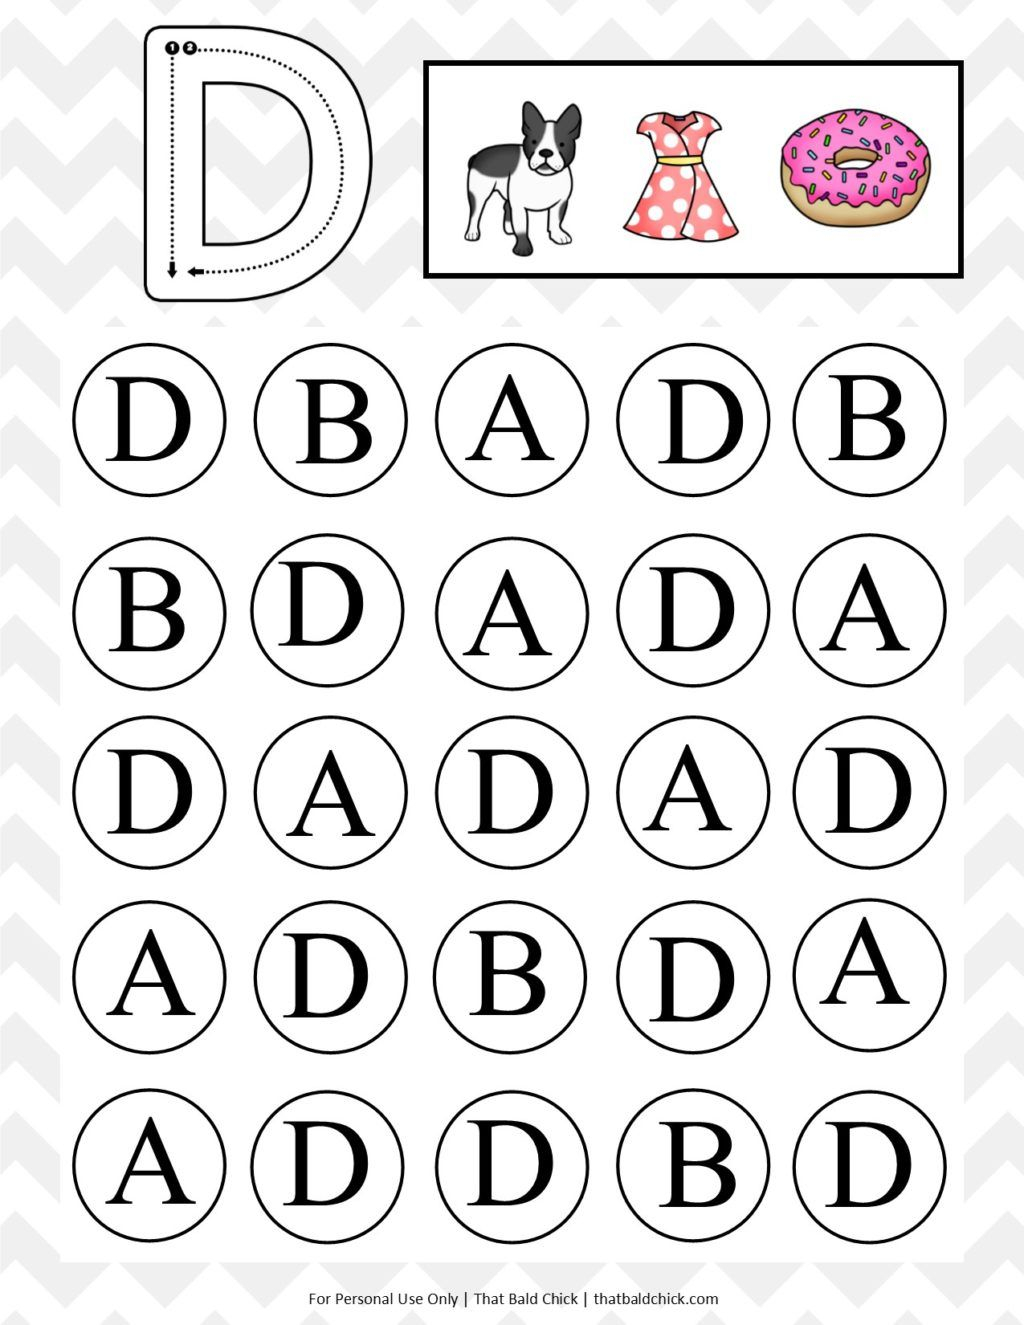 Practice Letter Recognition With This Free Printable within Alphabet Recognition Worksheets For Nursery